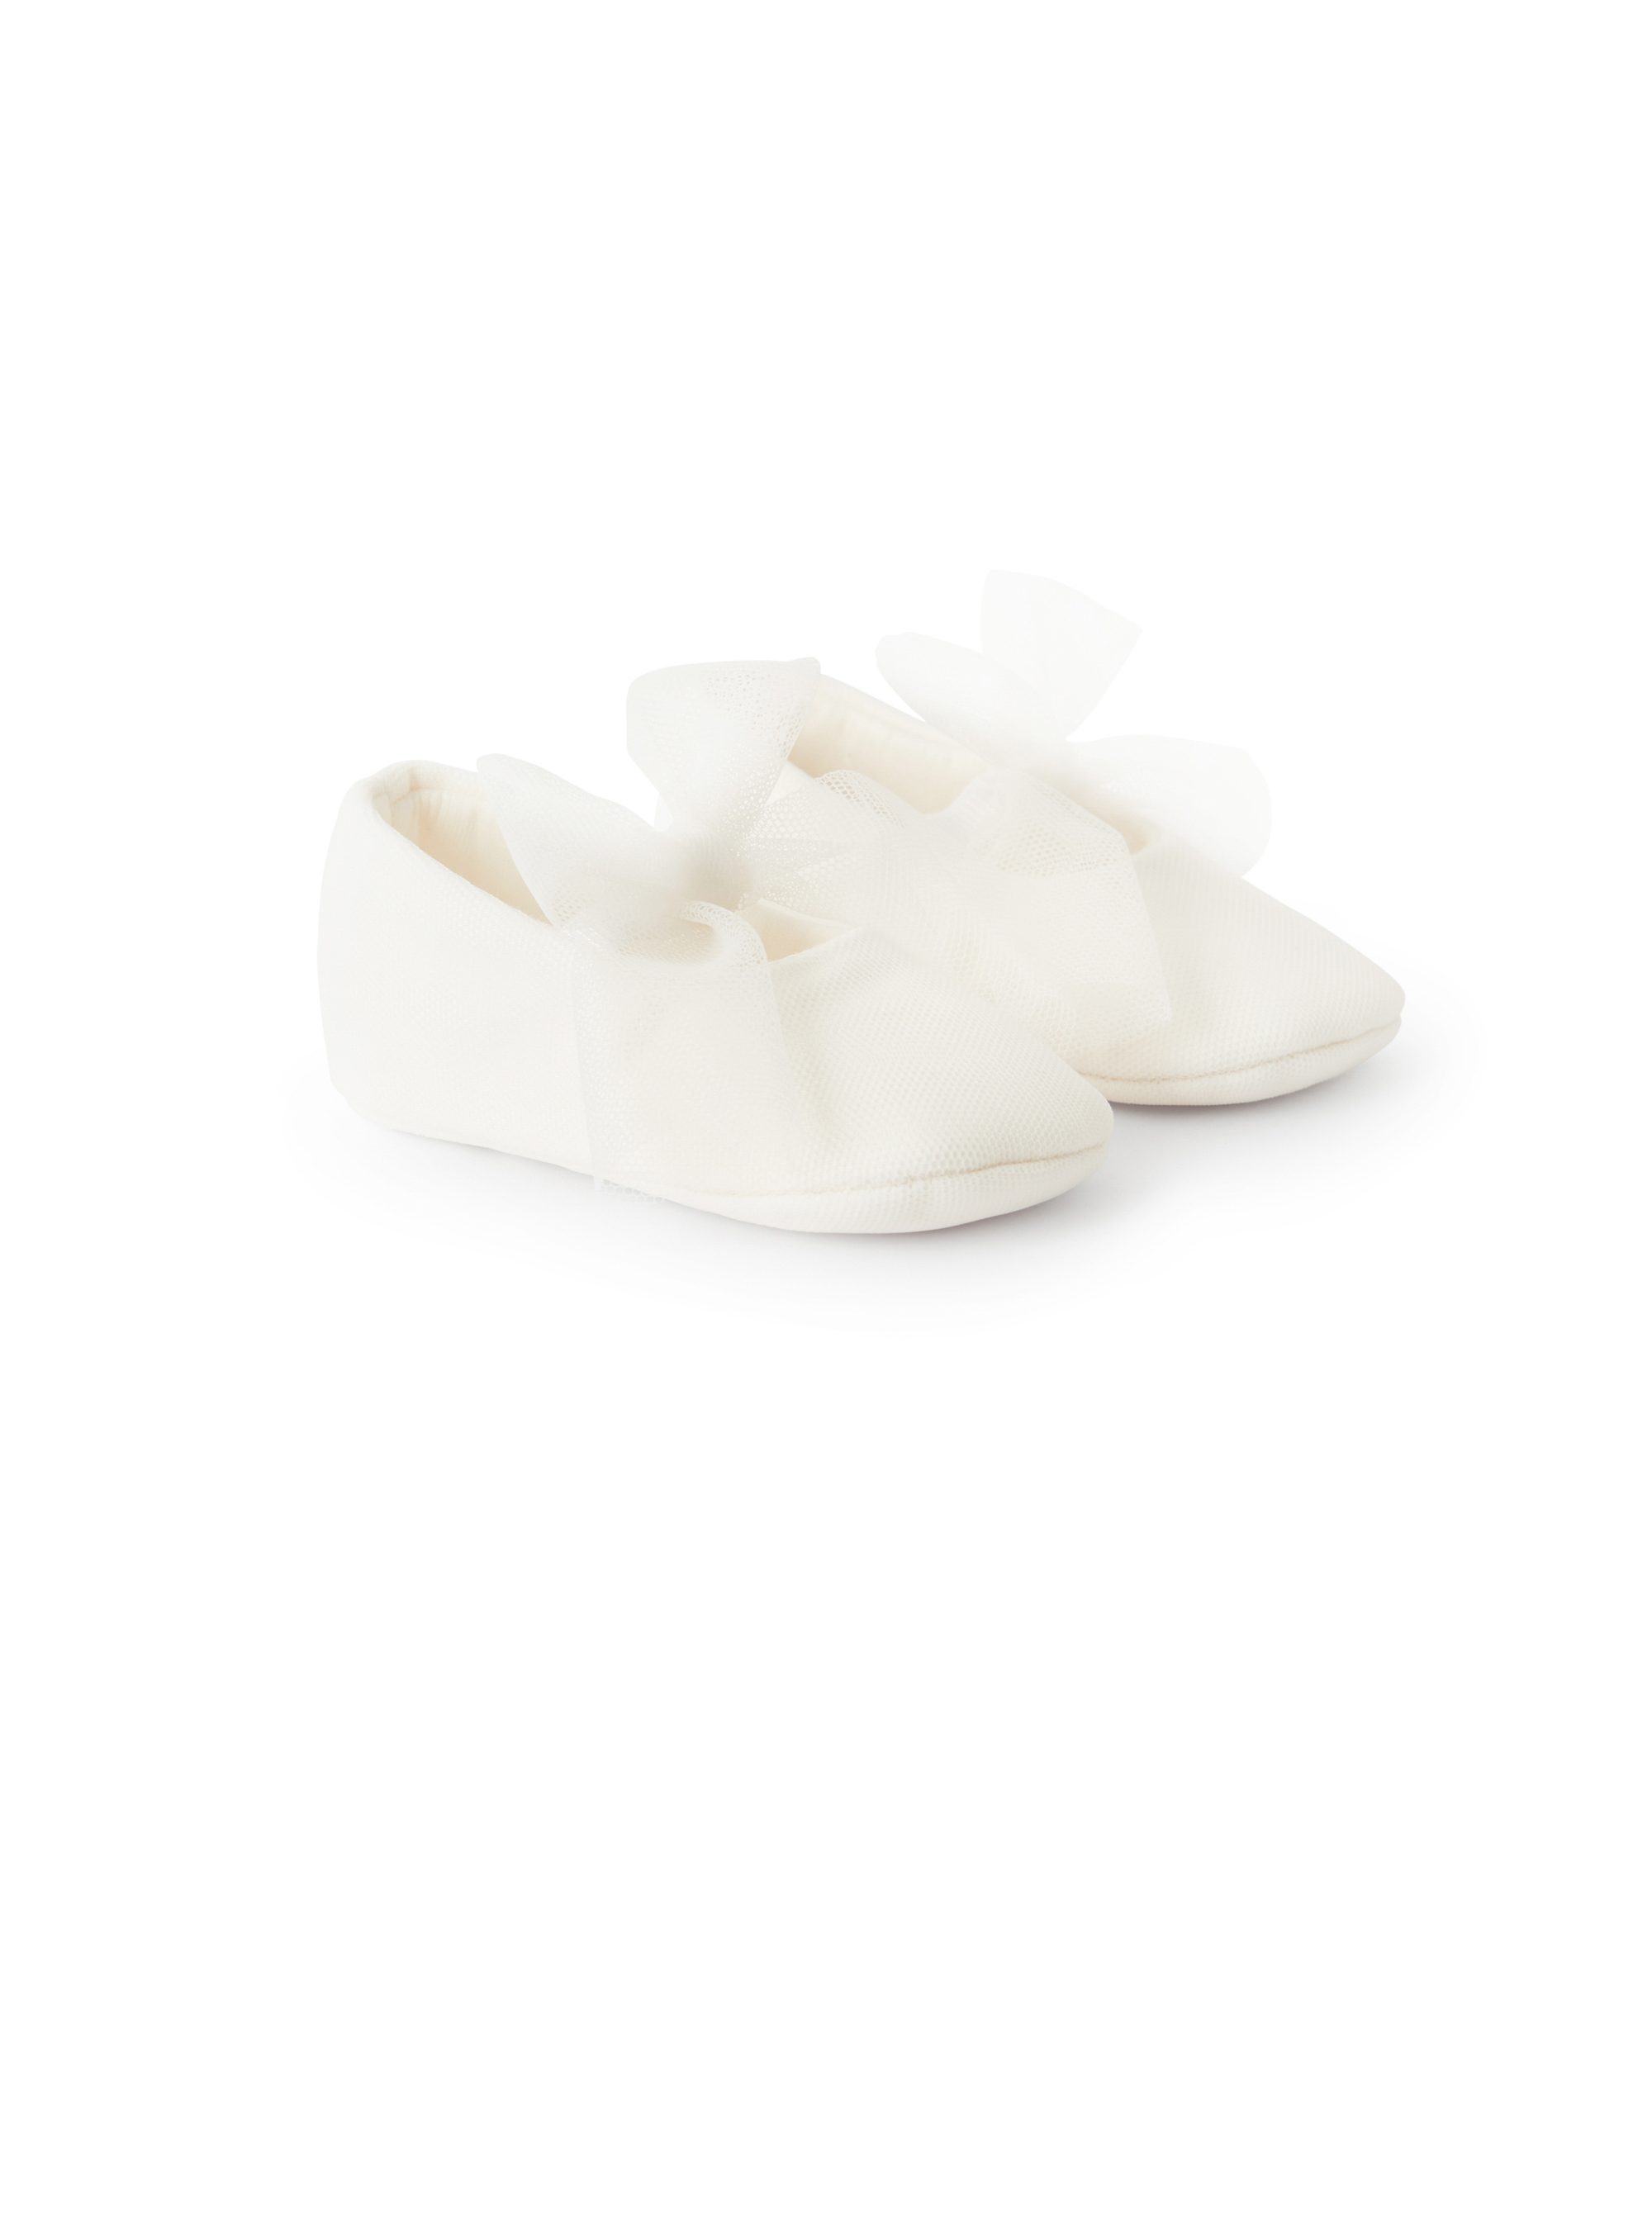 Milky white tulle shoes - Shoes - Il Gufo